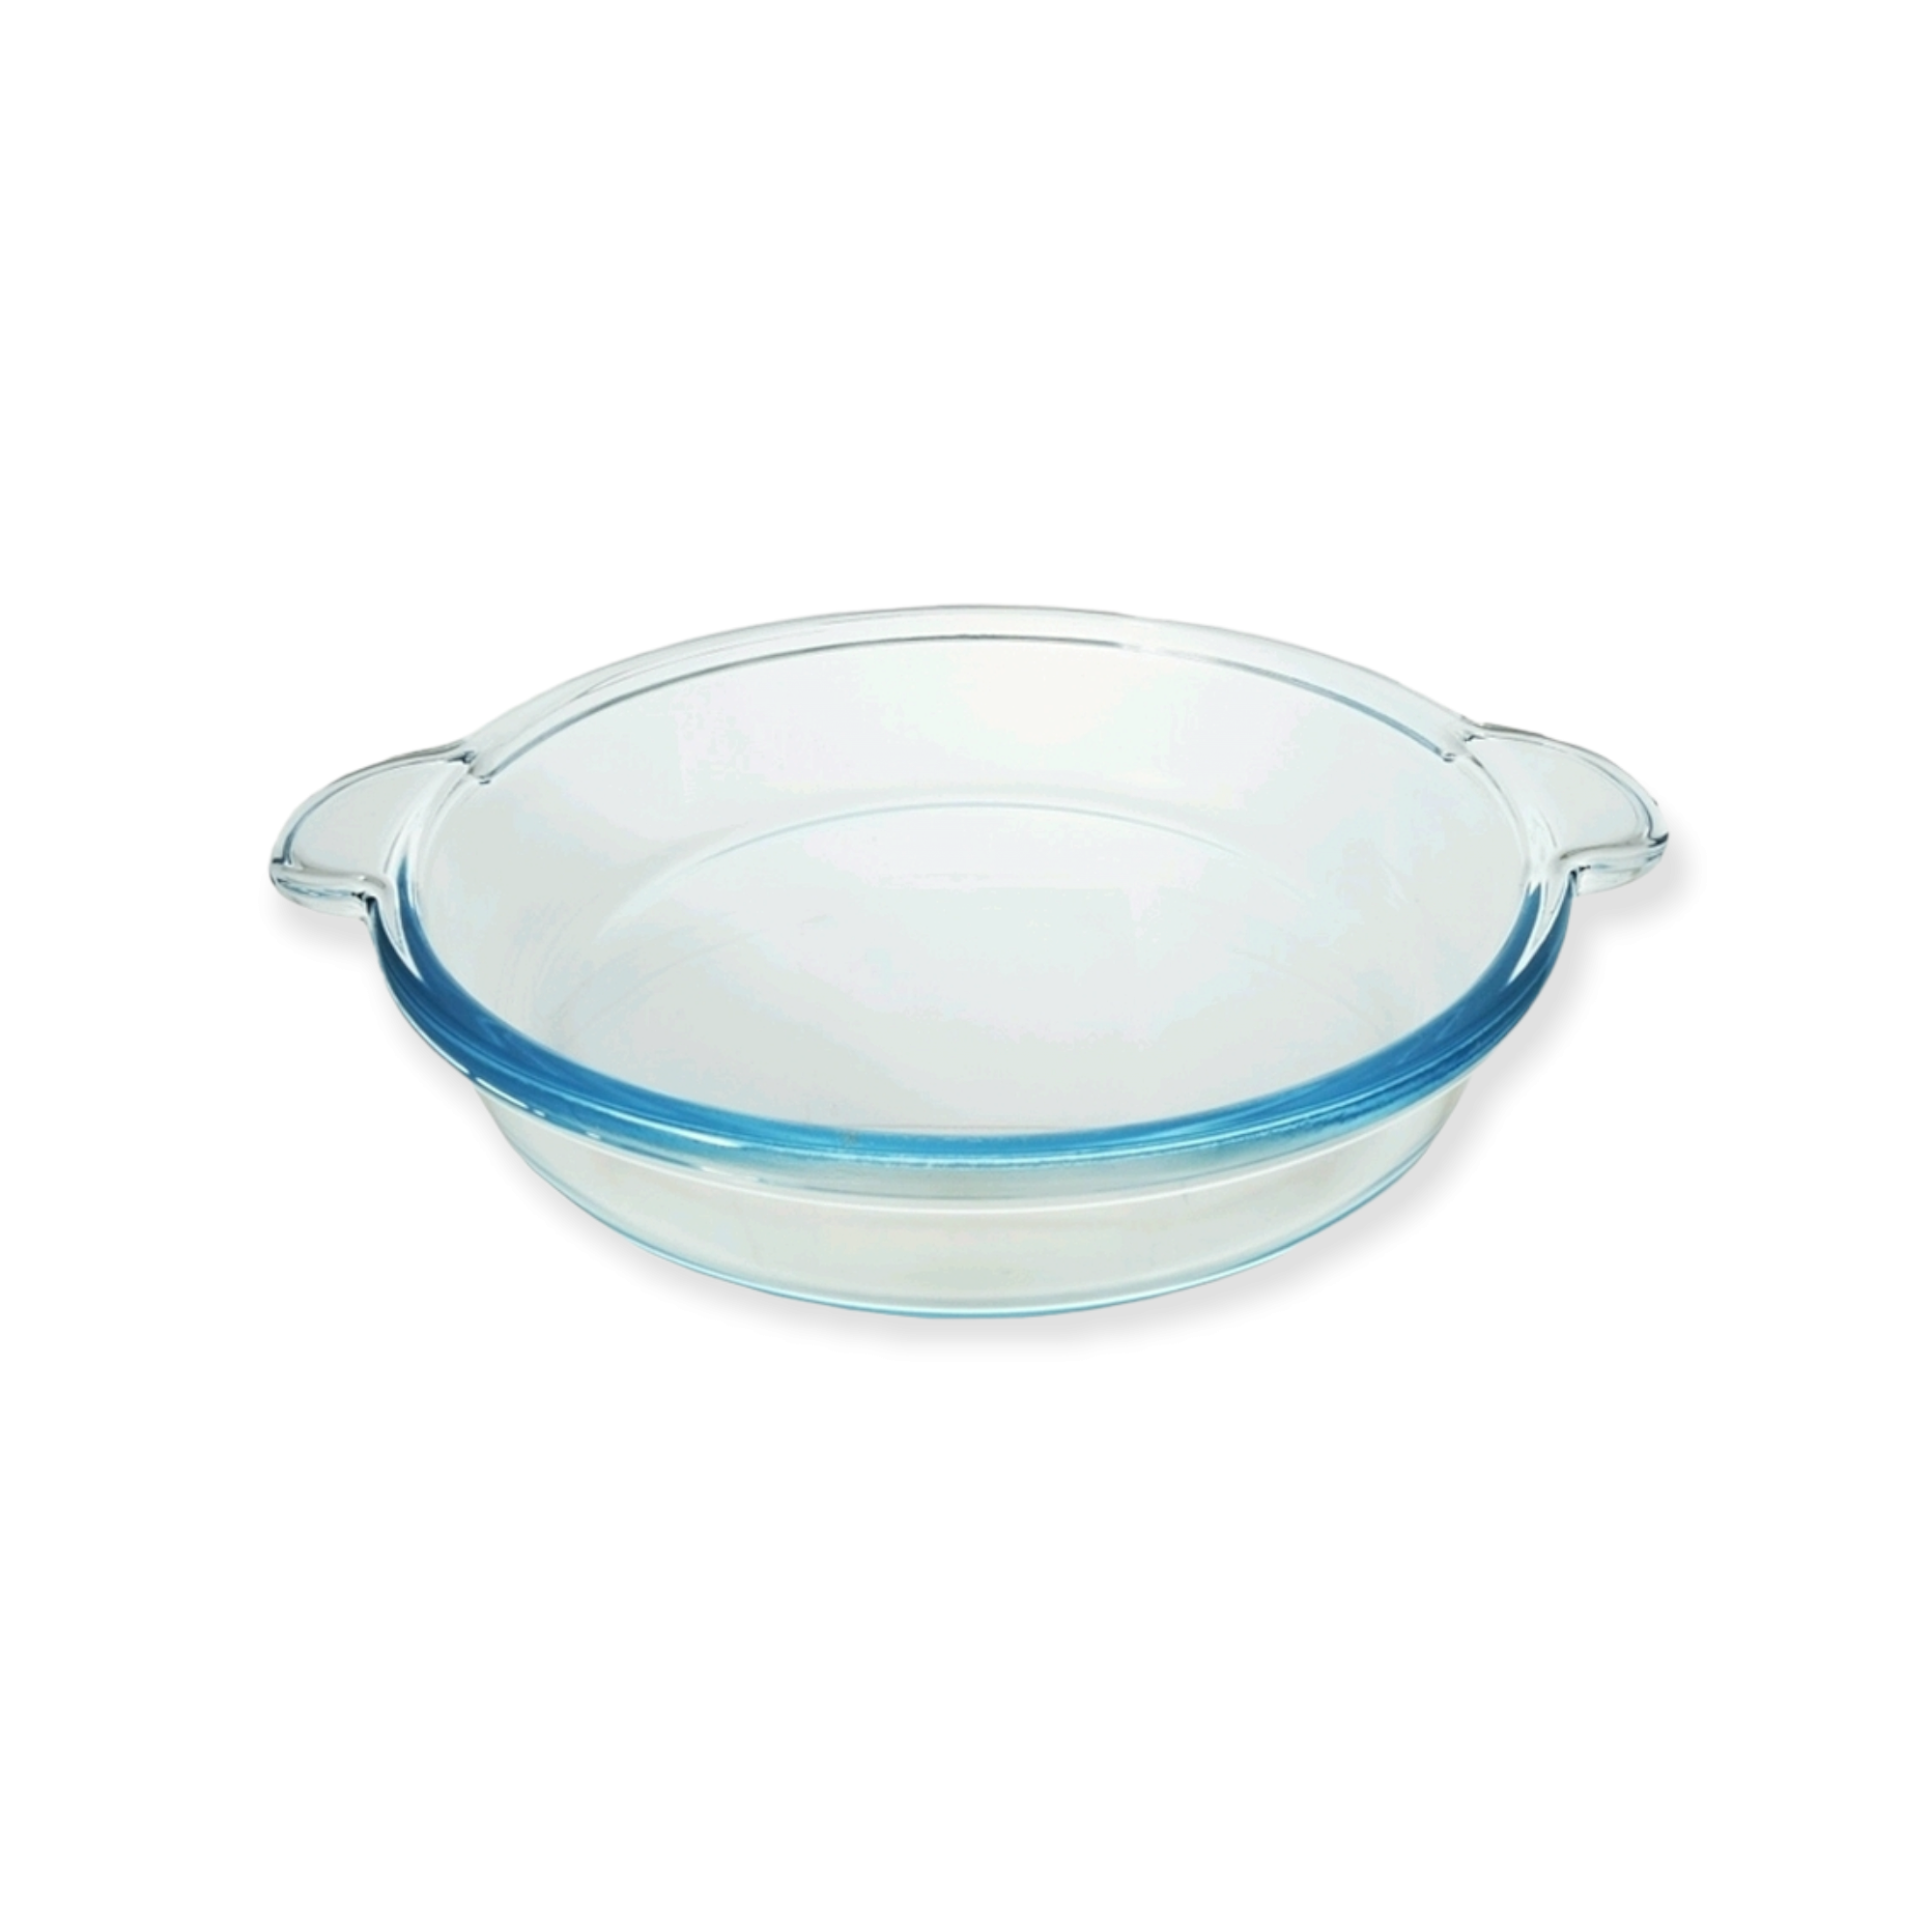 Borcam Glass Serving Dish Tray Round with Handle 23043